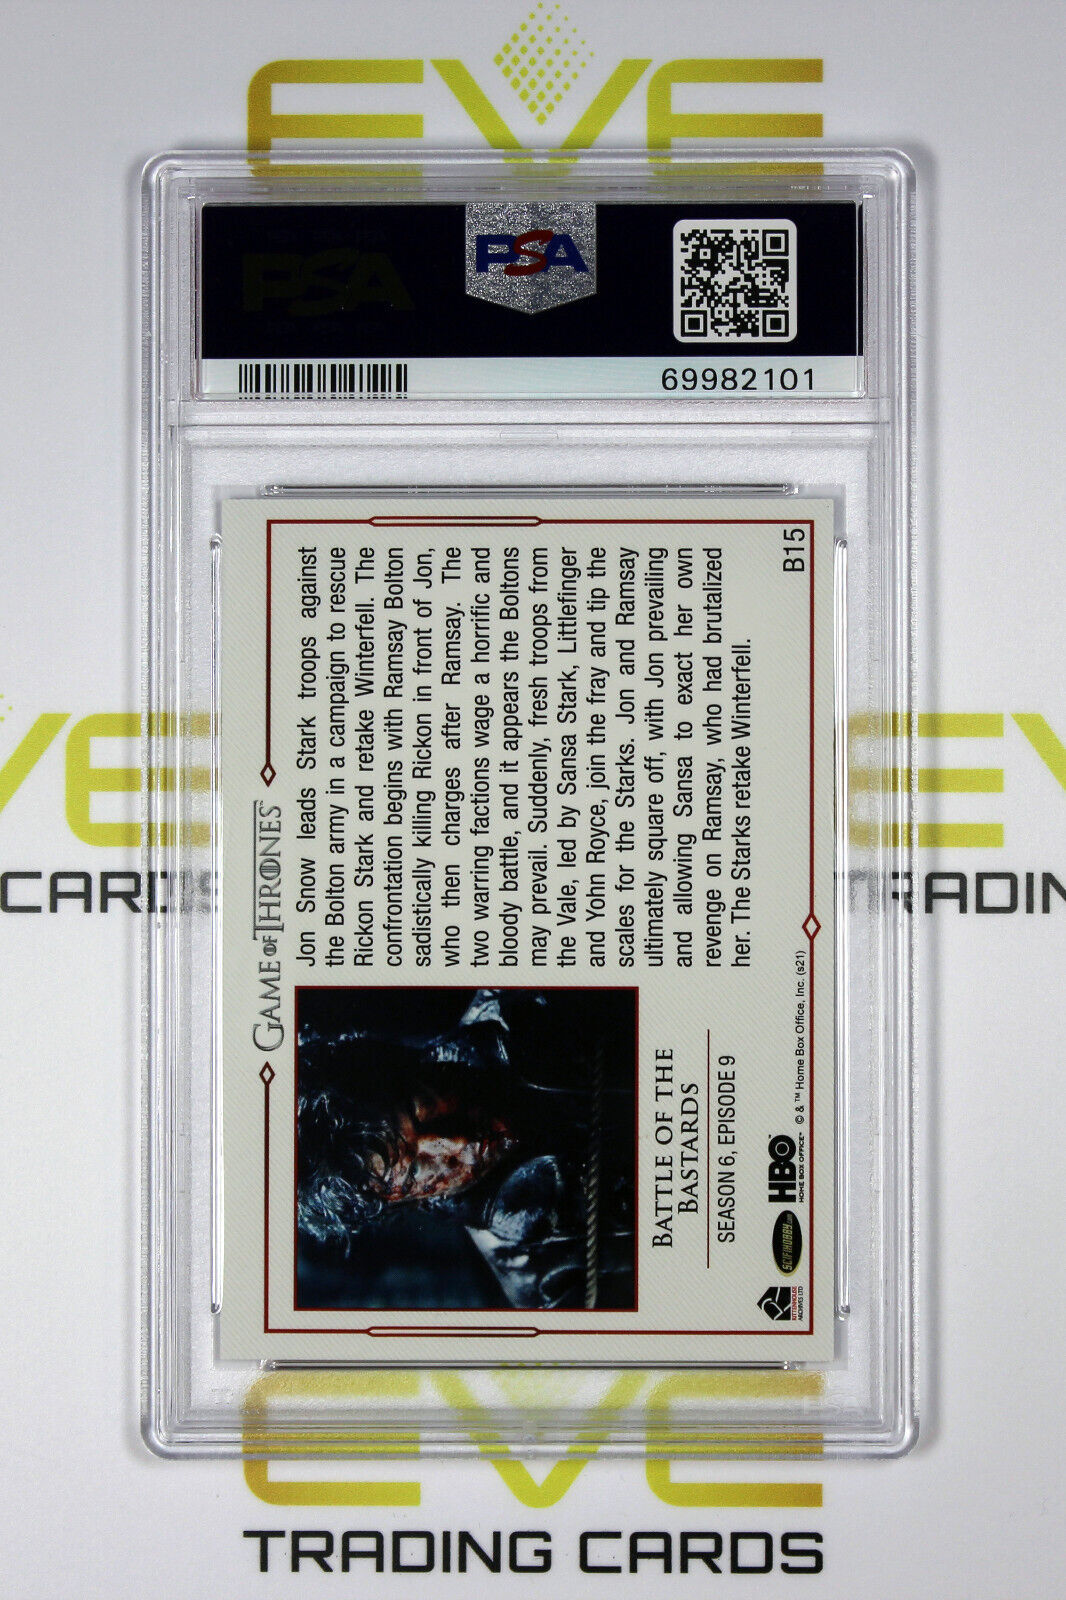 Graded Game of Thrones Card - #B15 2021 Battle of the Bastards - PSA 10